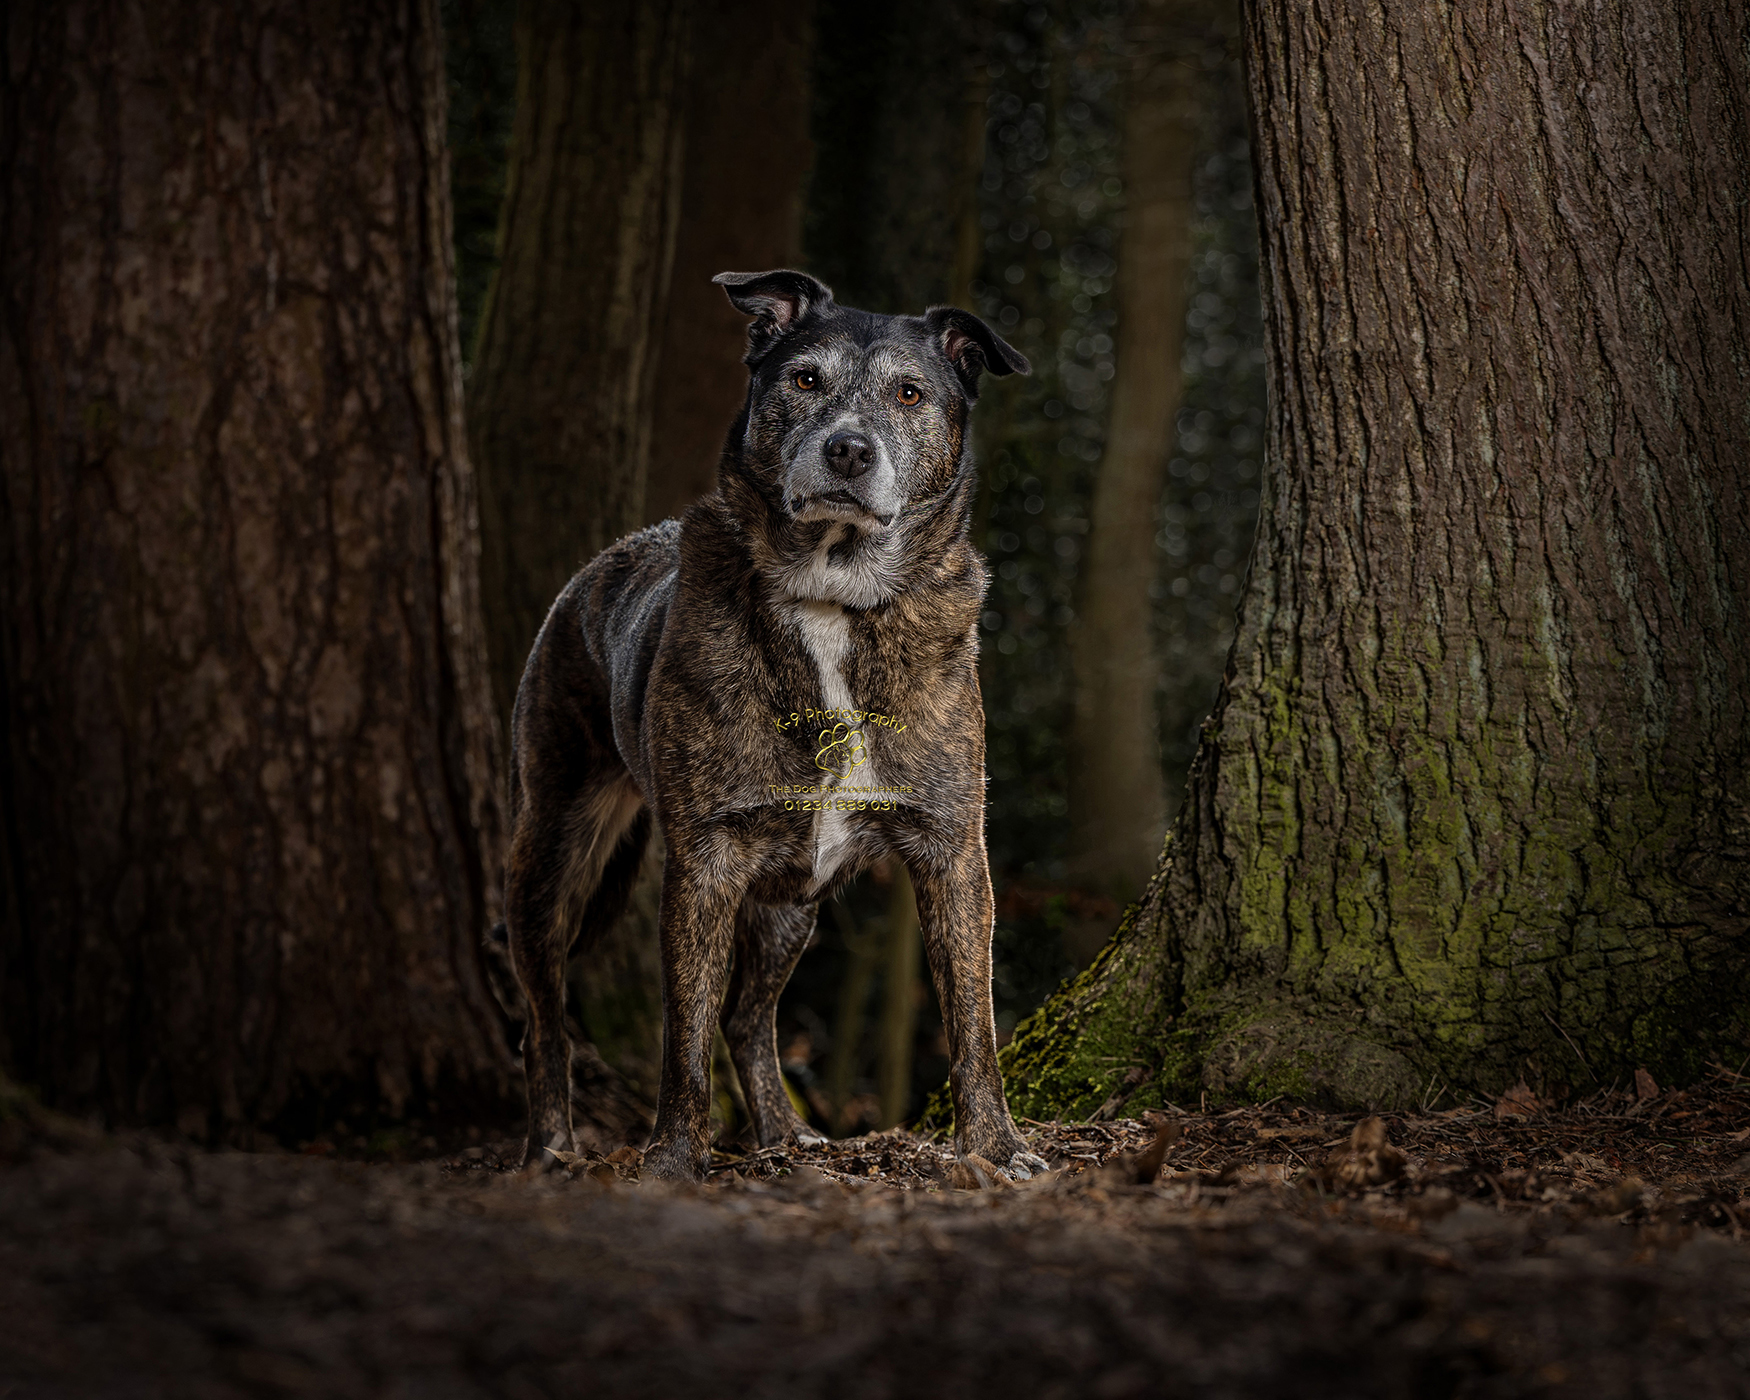 Dog and Pet Photography specialist in Bedford, Bedfordshire |photographed in the studio by award winning Dog and Pet photographer Adrian Bullers